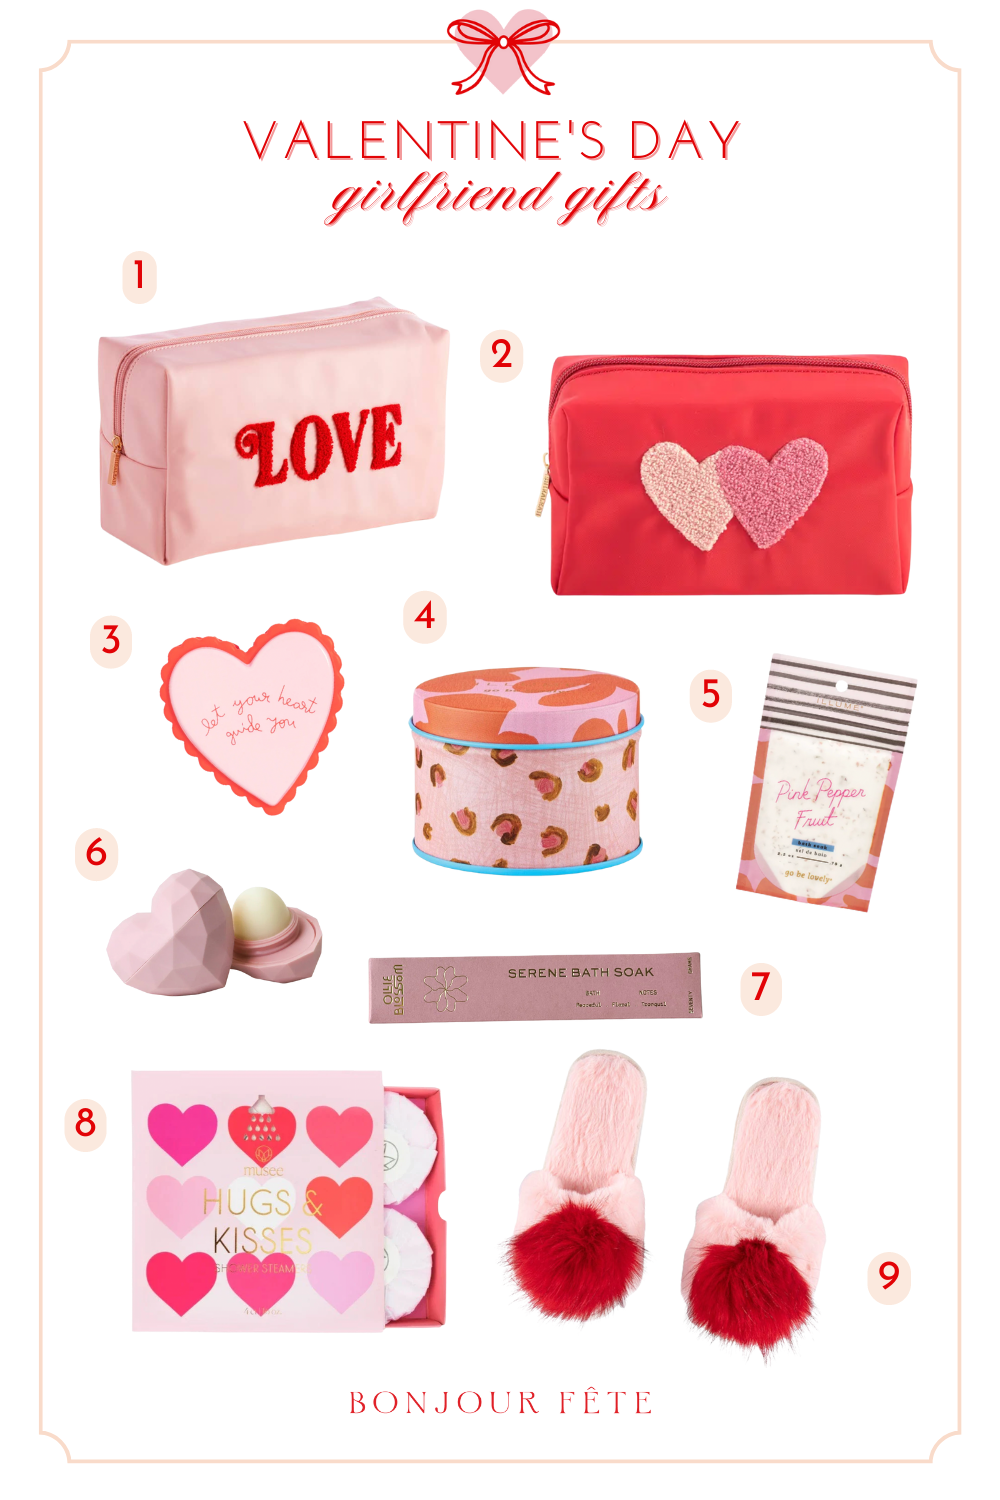 Valentine's Day gift ideas for girlfriends.